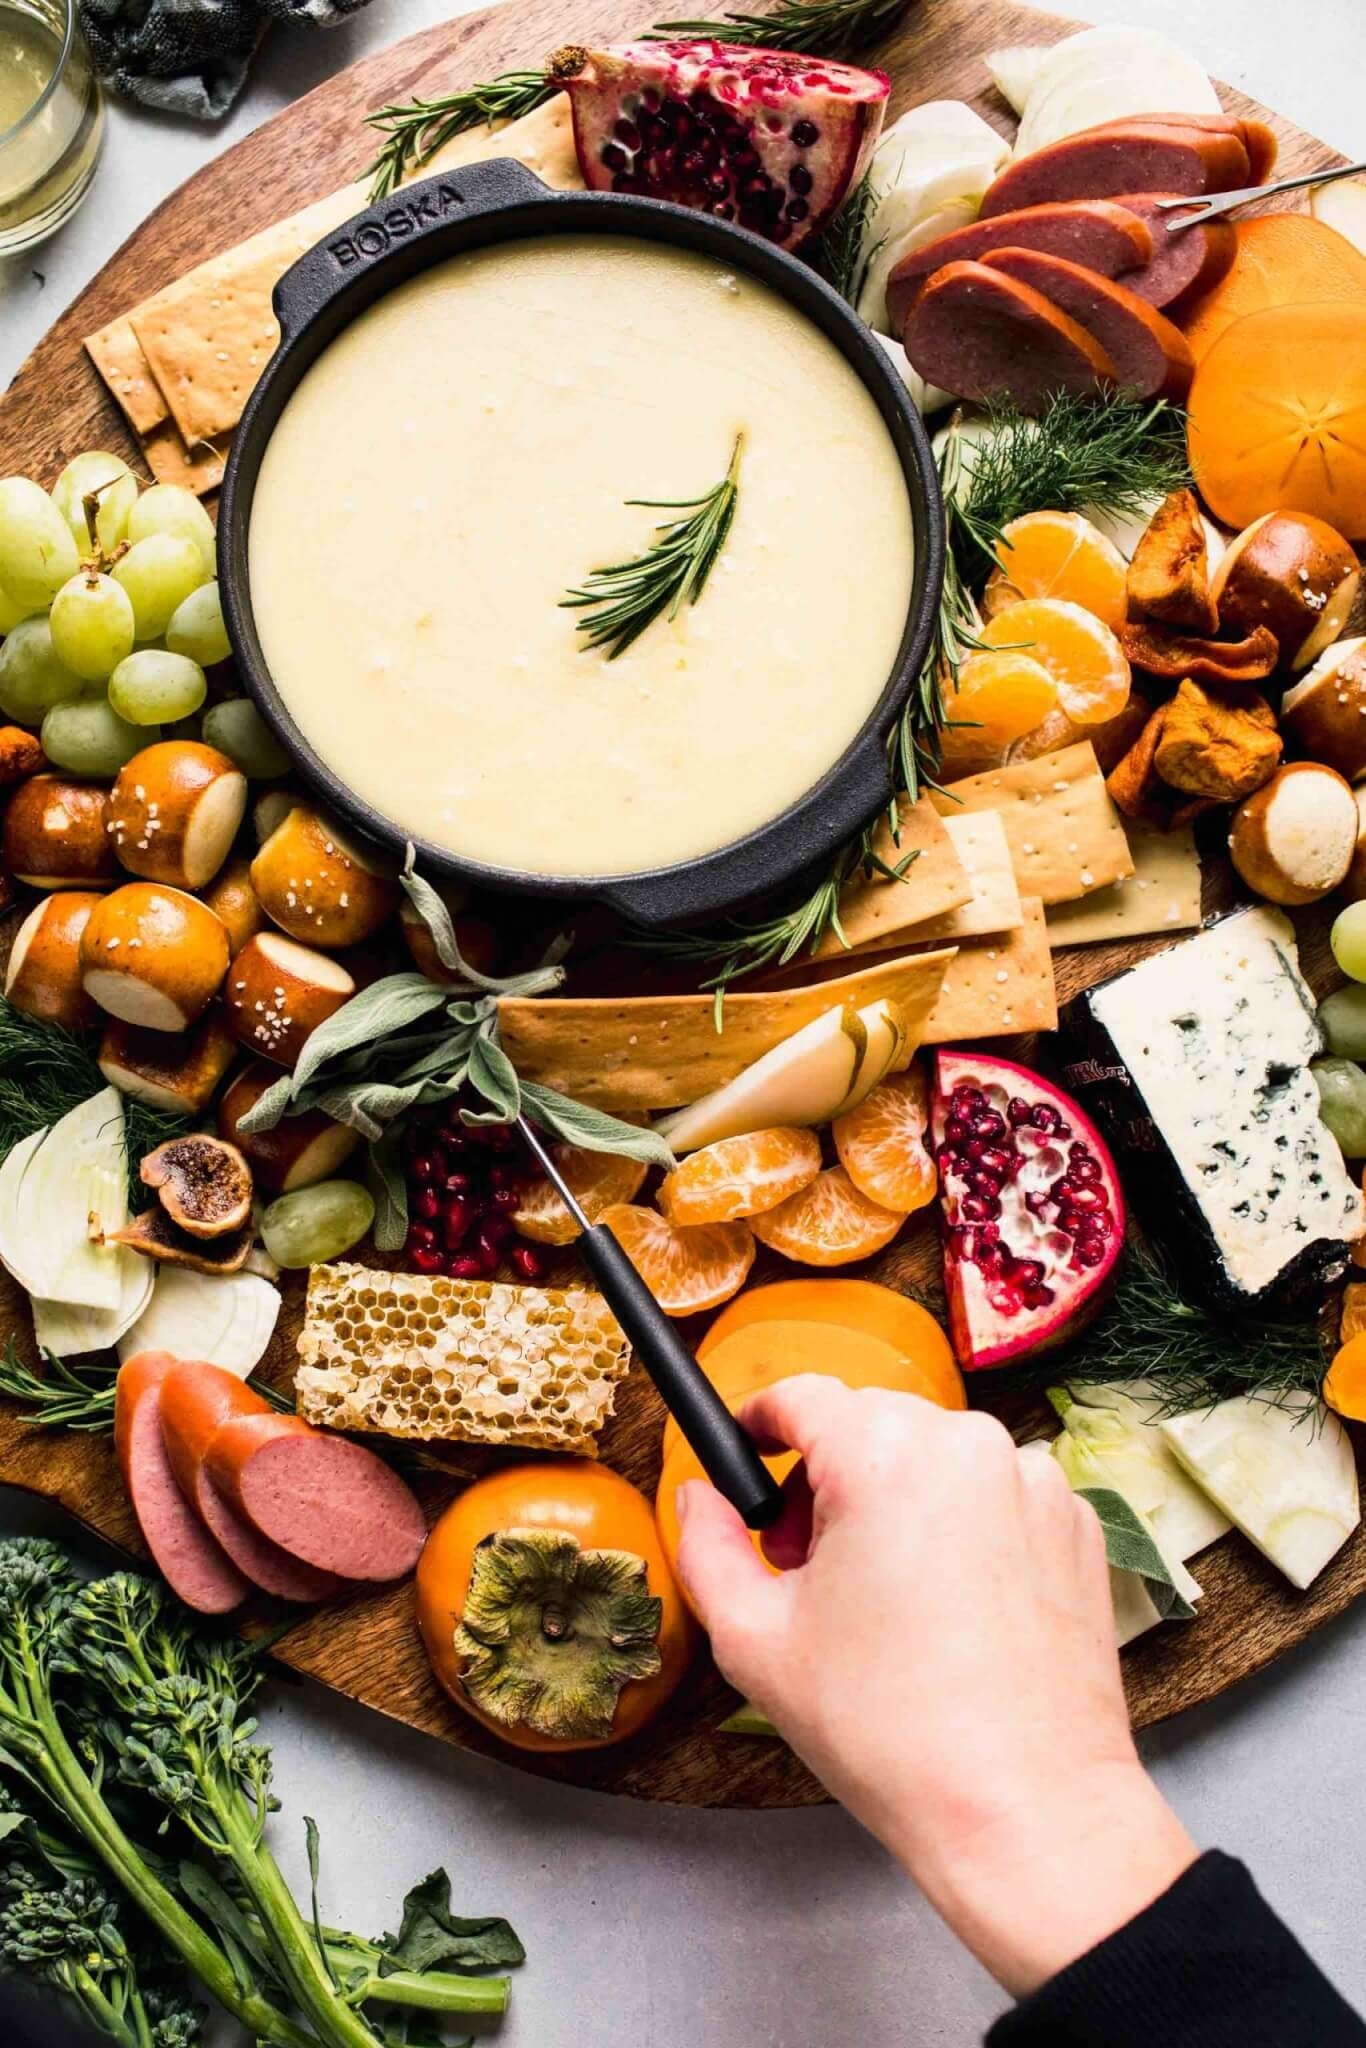 Cheese fondue with vegetables, crackers, bread, and fruit for dipping